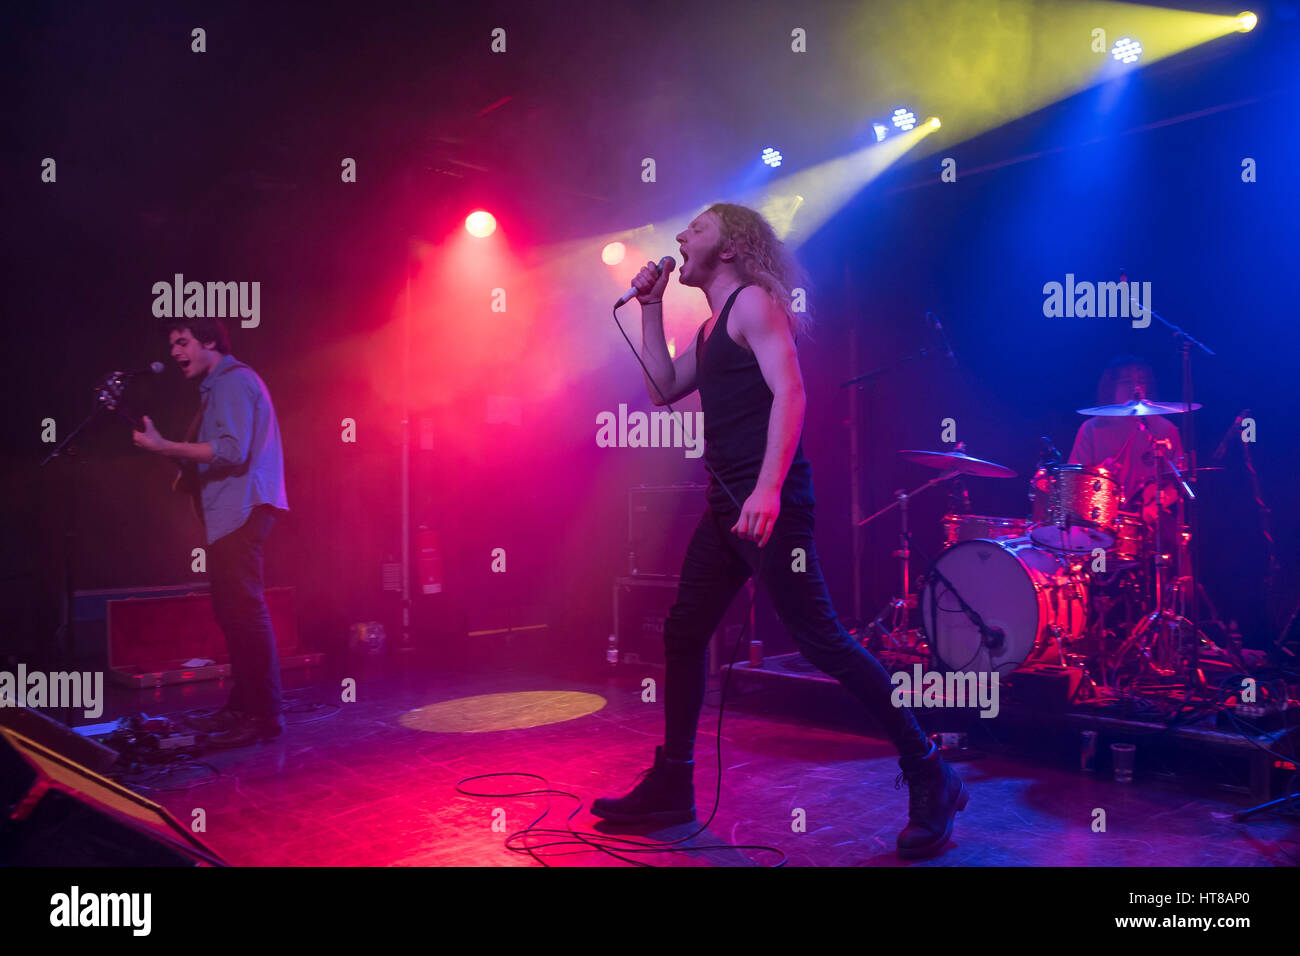 London, UK. 07th Mar, 2017. American rock band The Orwells perform on stage at Scala. The Orwells are an American rock band from Elmhurst, IL, a western suburb of Chicago. The members include Mario Cuomo (vocals), Dominic Corso (guitar), Matt O'Keefe (guitar), Grant Brinner (bass), and Henry Brinner (drums). Credit: Alberto Pezzali/Pacific Press/Alamy Live News Stock Photo